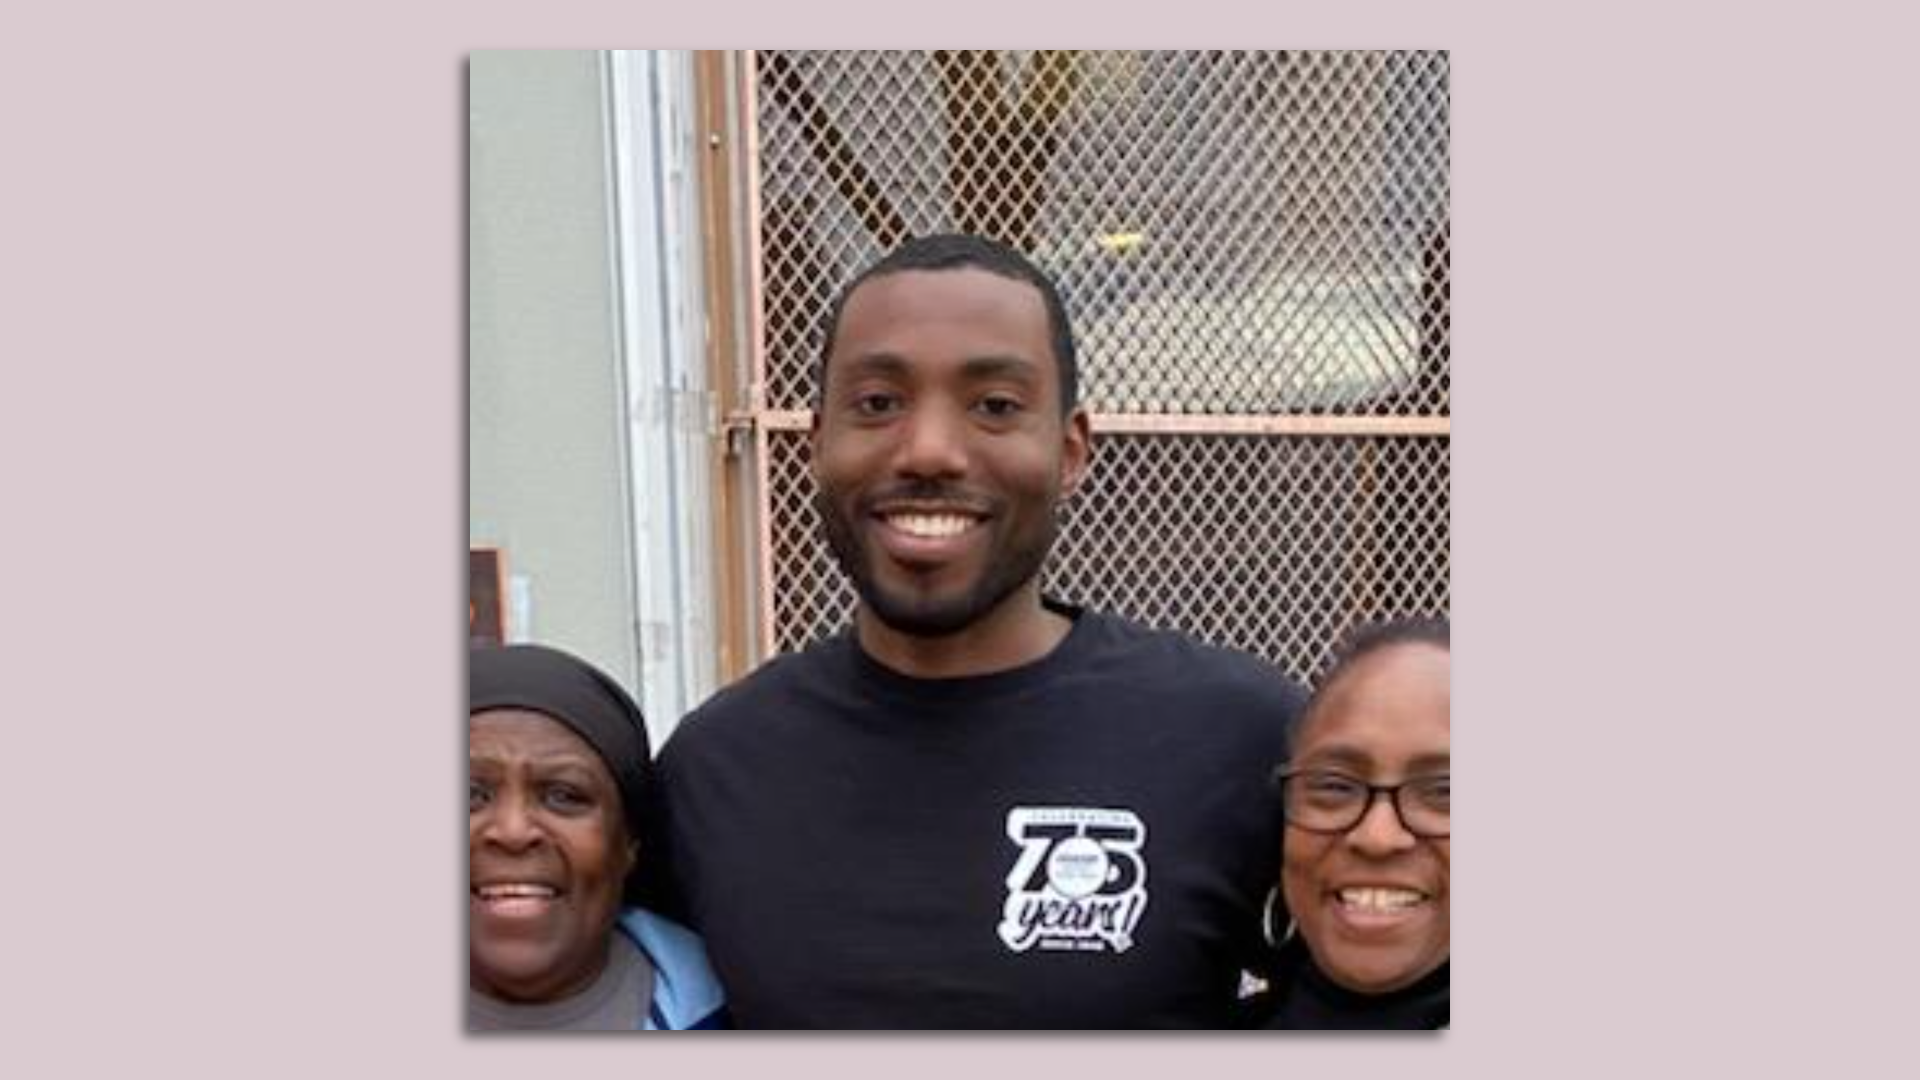 Donta Rose smiles while standing next to two women.